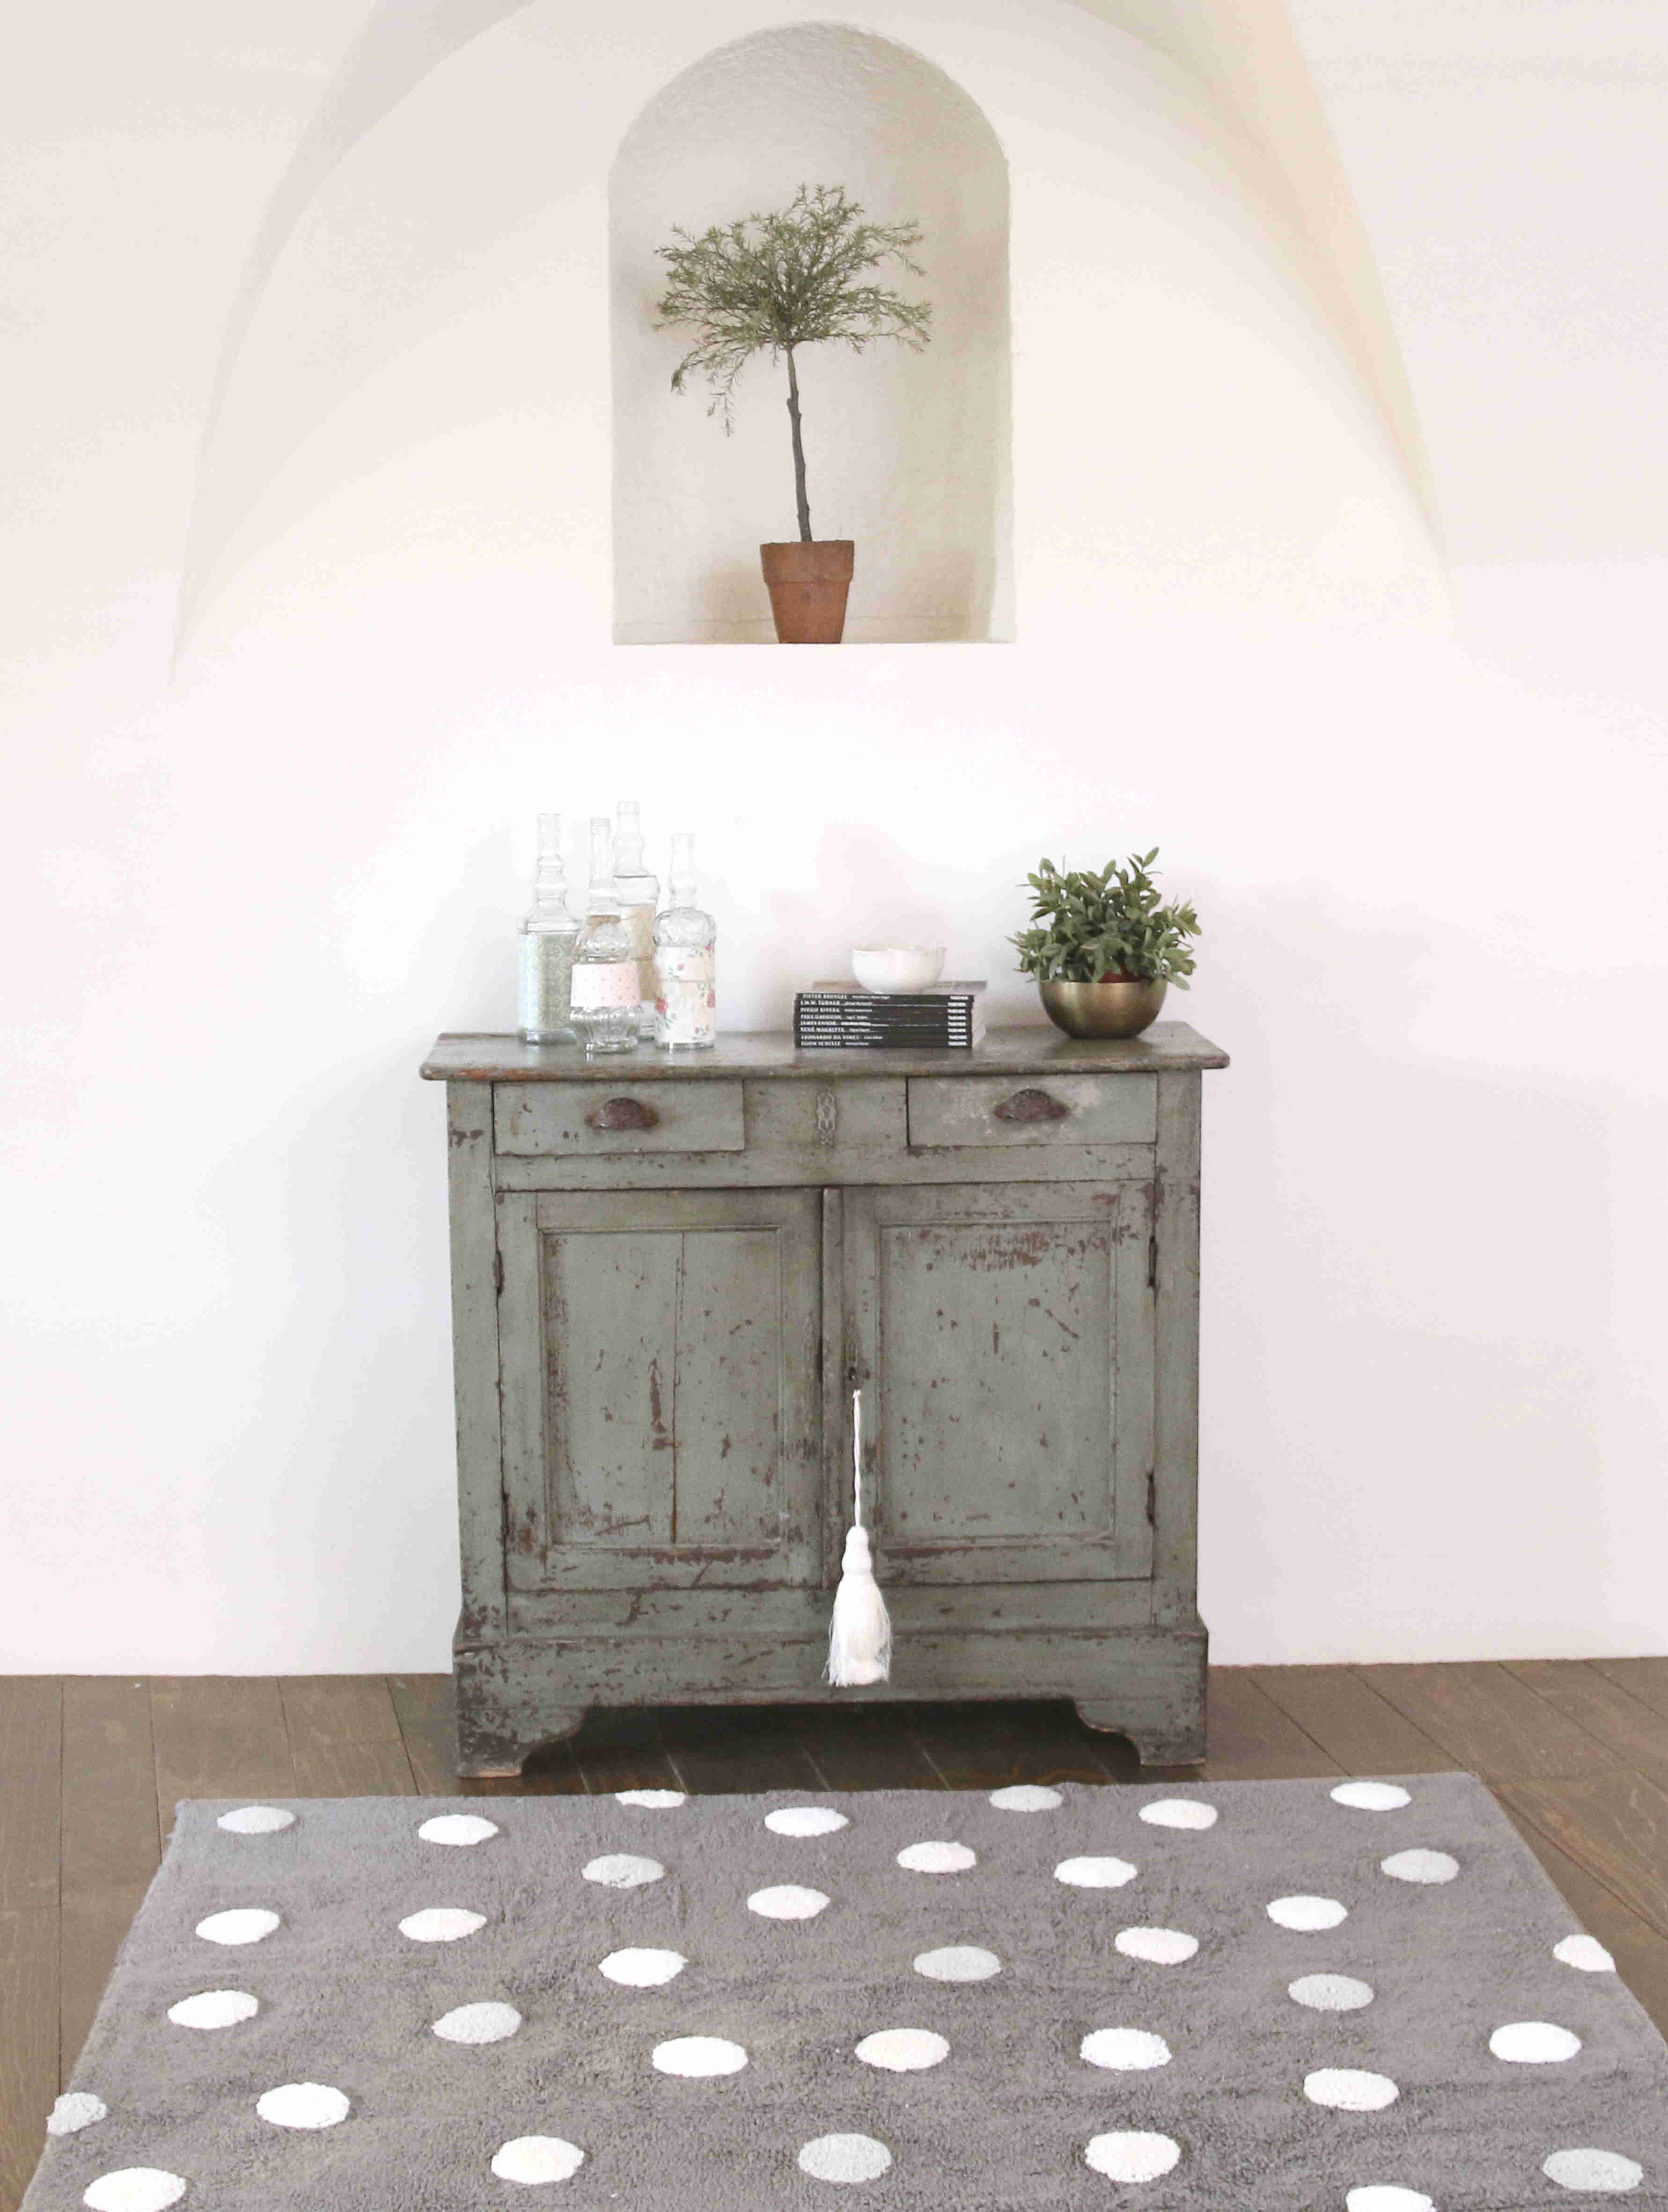 Rectangular grey cotton rug decorated with white polka dots